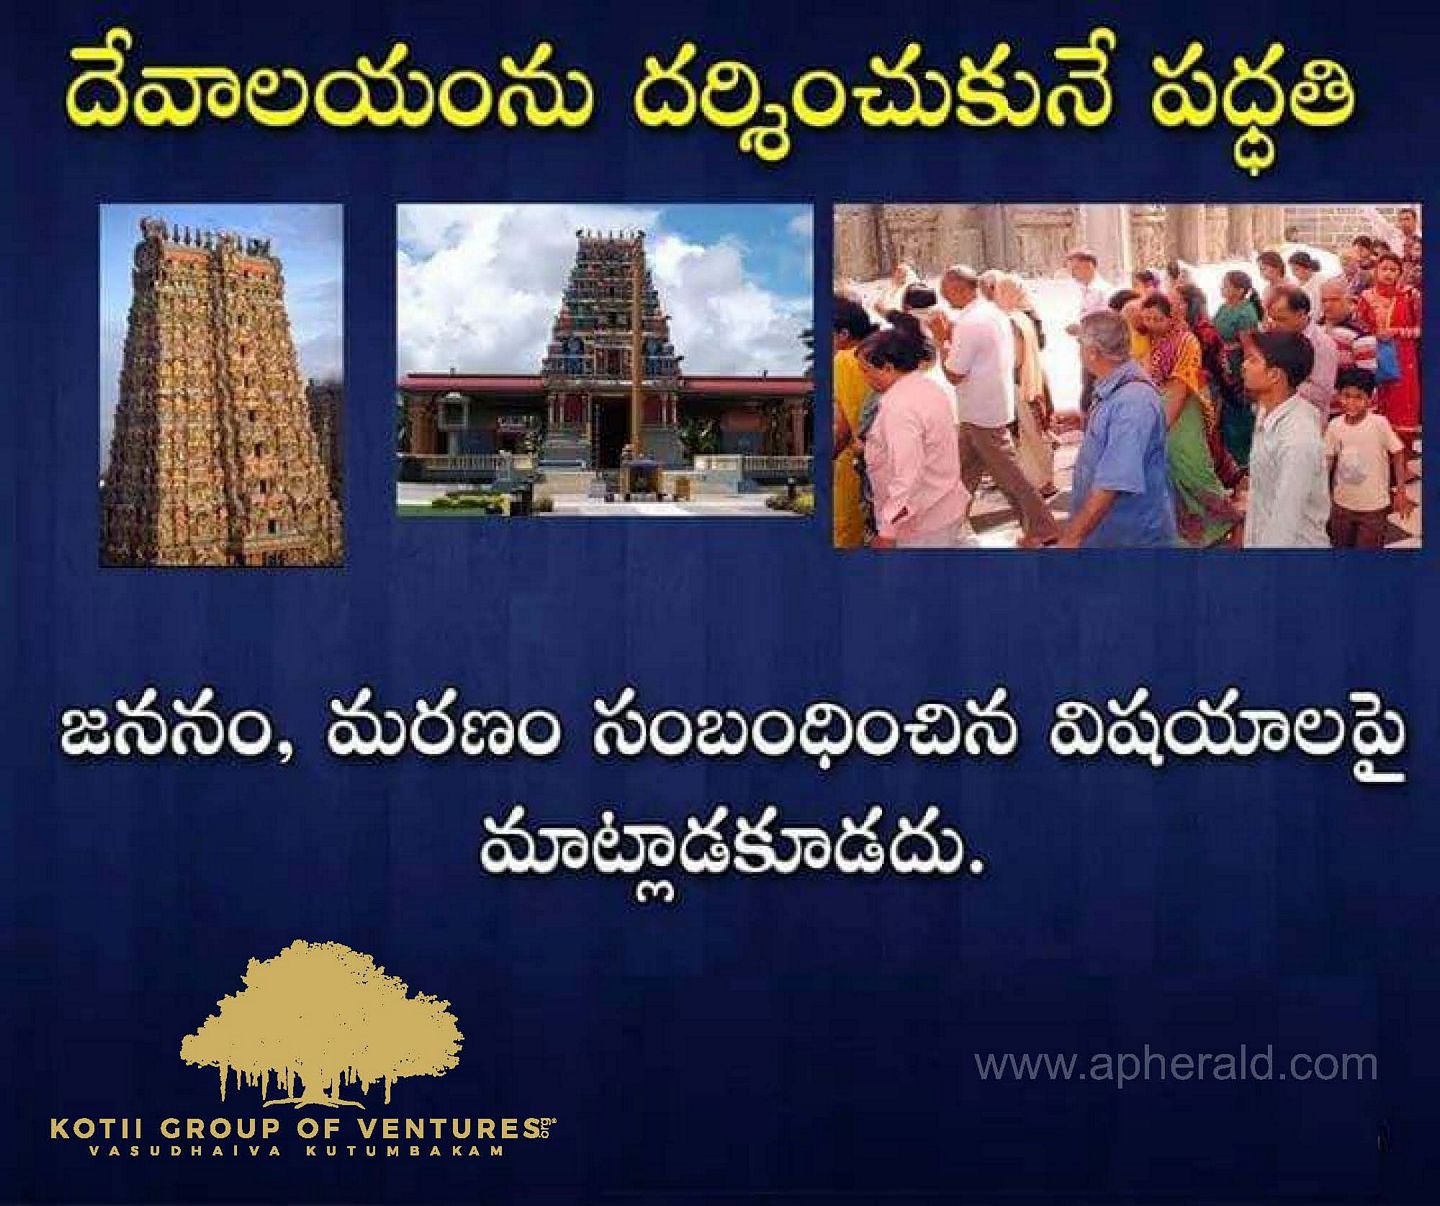 What Rules Should be Follow Hindu Temples